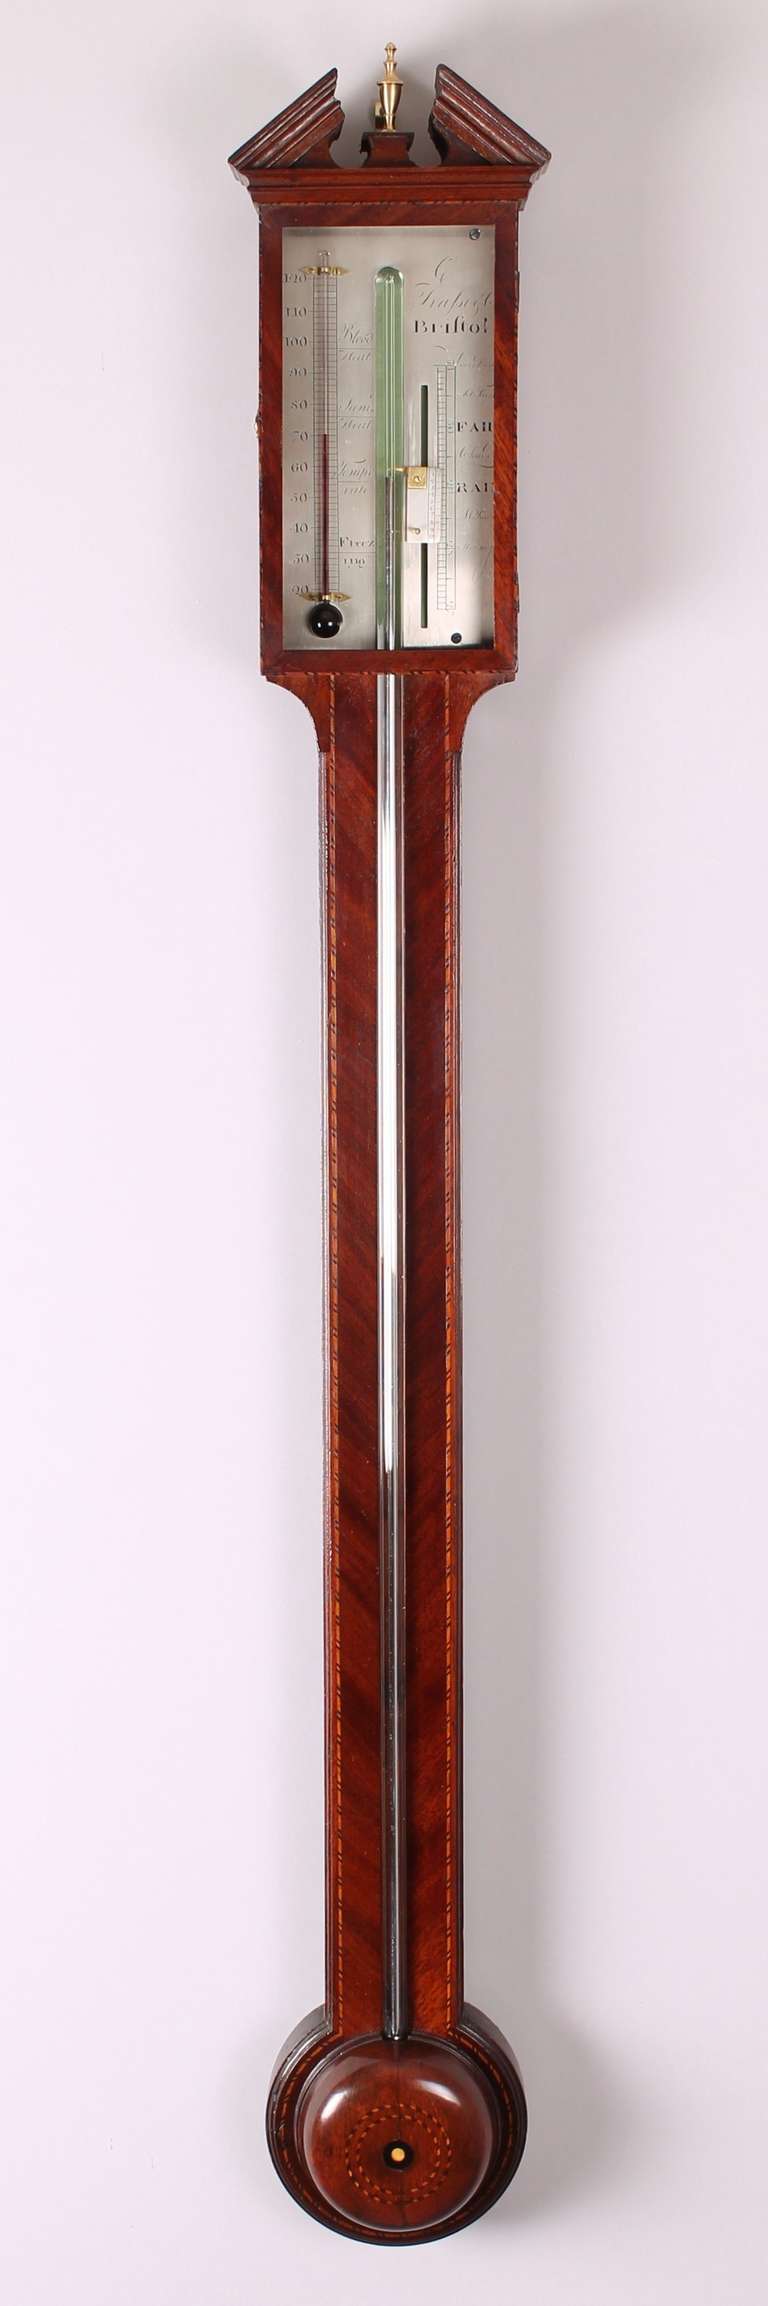 George III mahogany stick barometer by C Trassi & Co, Bristol; the silvered register fitted with an alcohol thermometer behind a glazed door; with a broken moulded pediment and a domed cistern cover with a central paterae and black and white